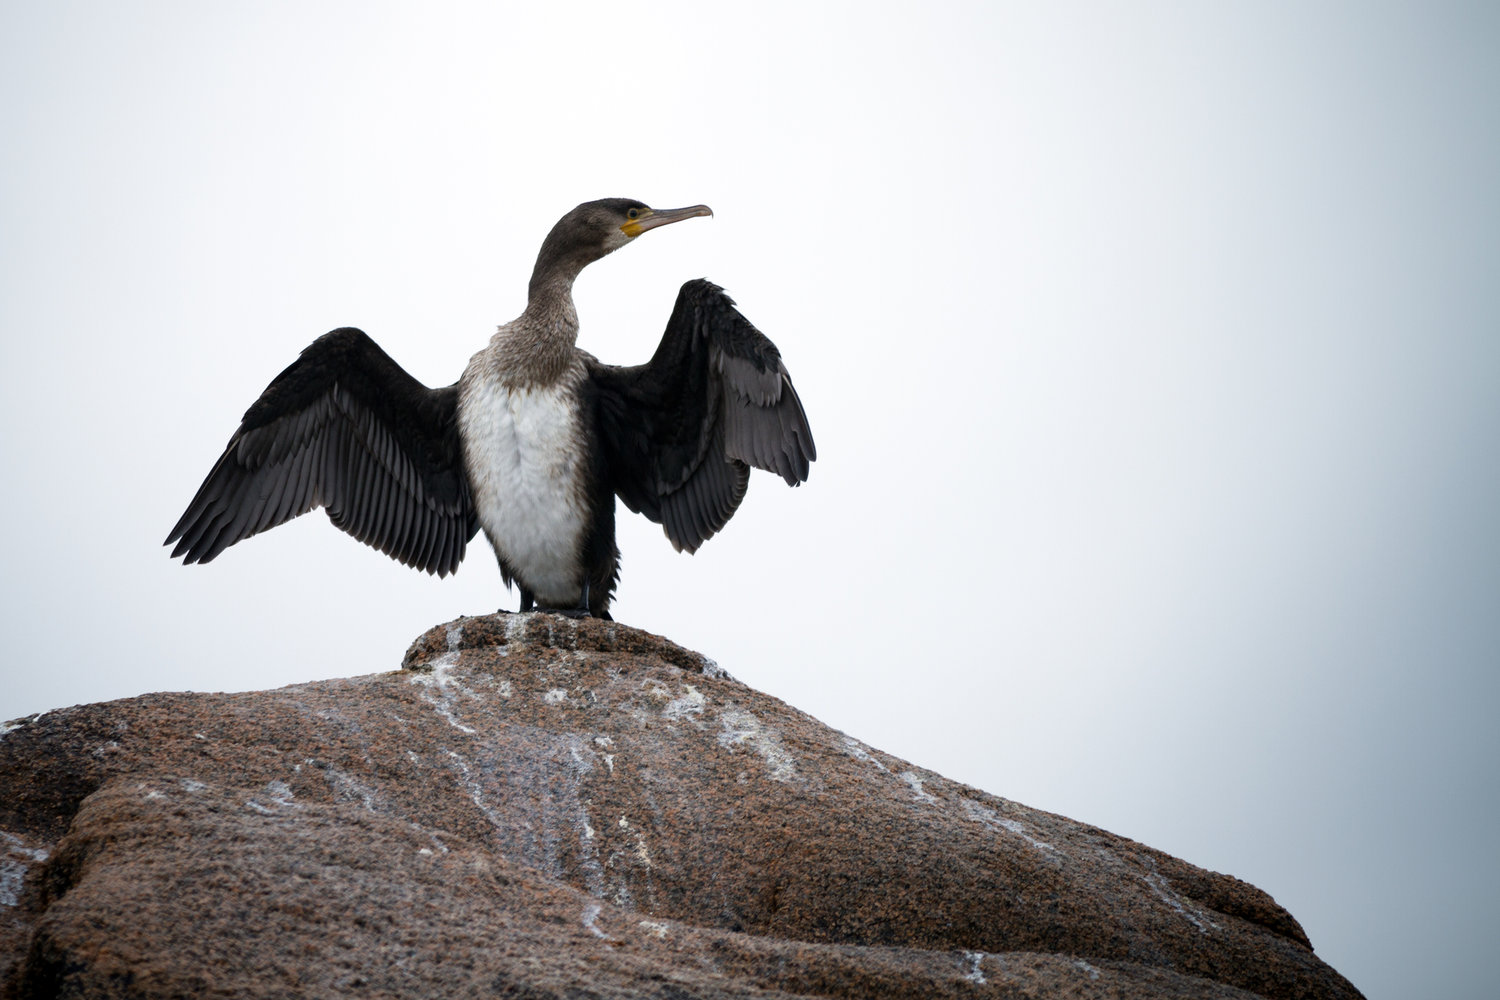 This juvenile Double-crested Cormorant is spreading its wings so it can dry off.